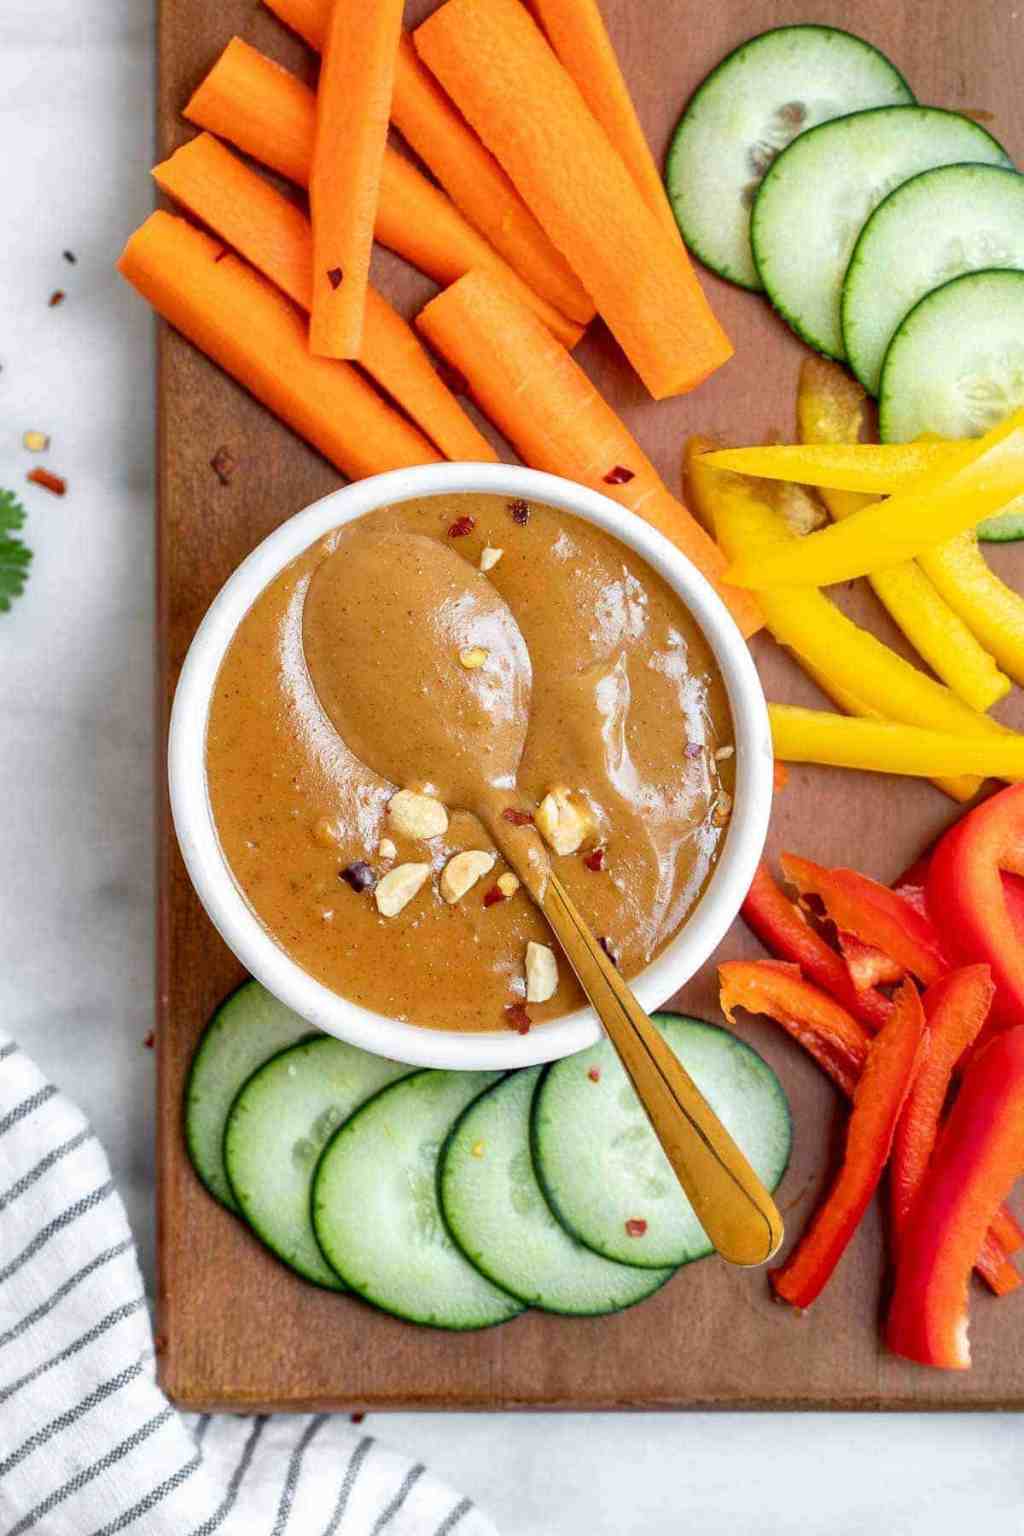 Best 5 Minute Thai Peanut Sauce from Eat With Clarity.